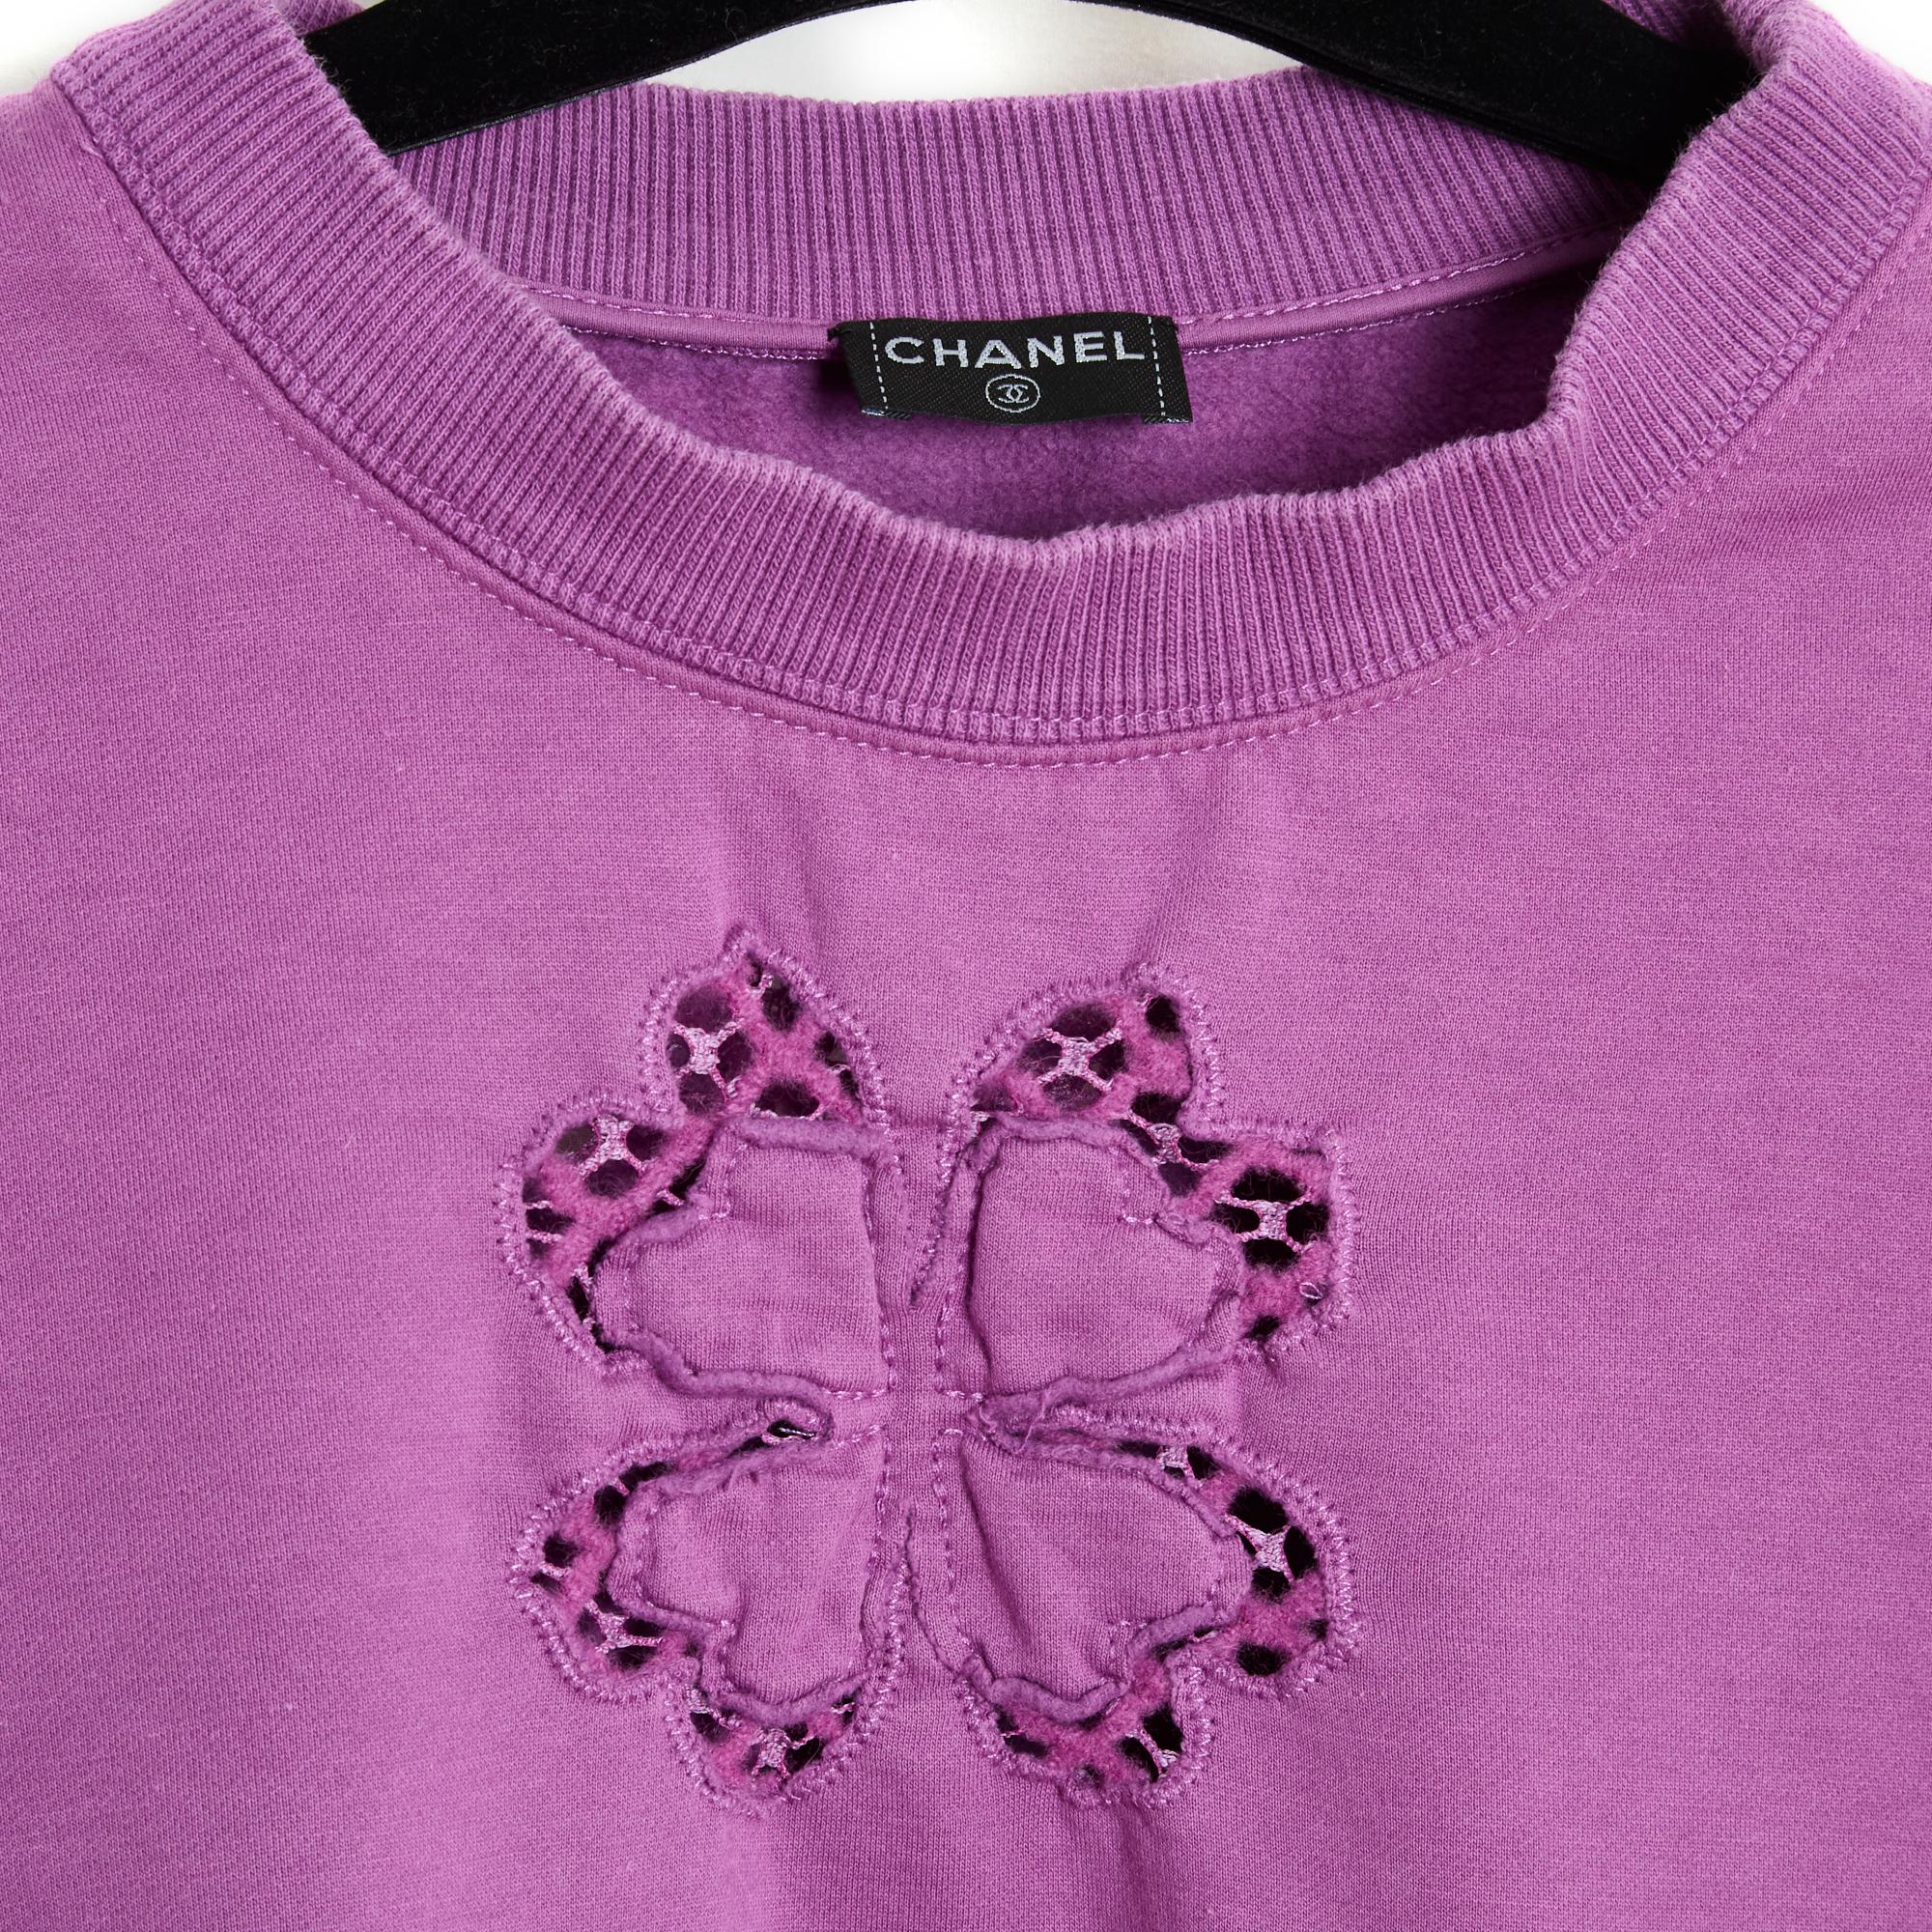 Top Chanel circa 2019 sweatshirt in cotton fleece and cashmere (10%) between pink and purple, openwork embroidery on the chest, with a clover motif, and on the back, with the Chanel logo motif, bottom of the sweatshirt bordered with coordinated